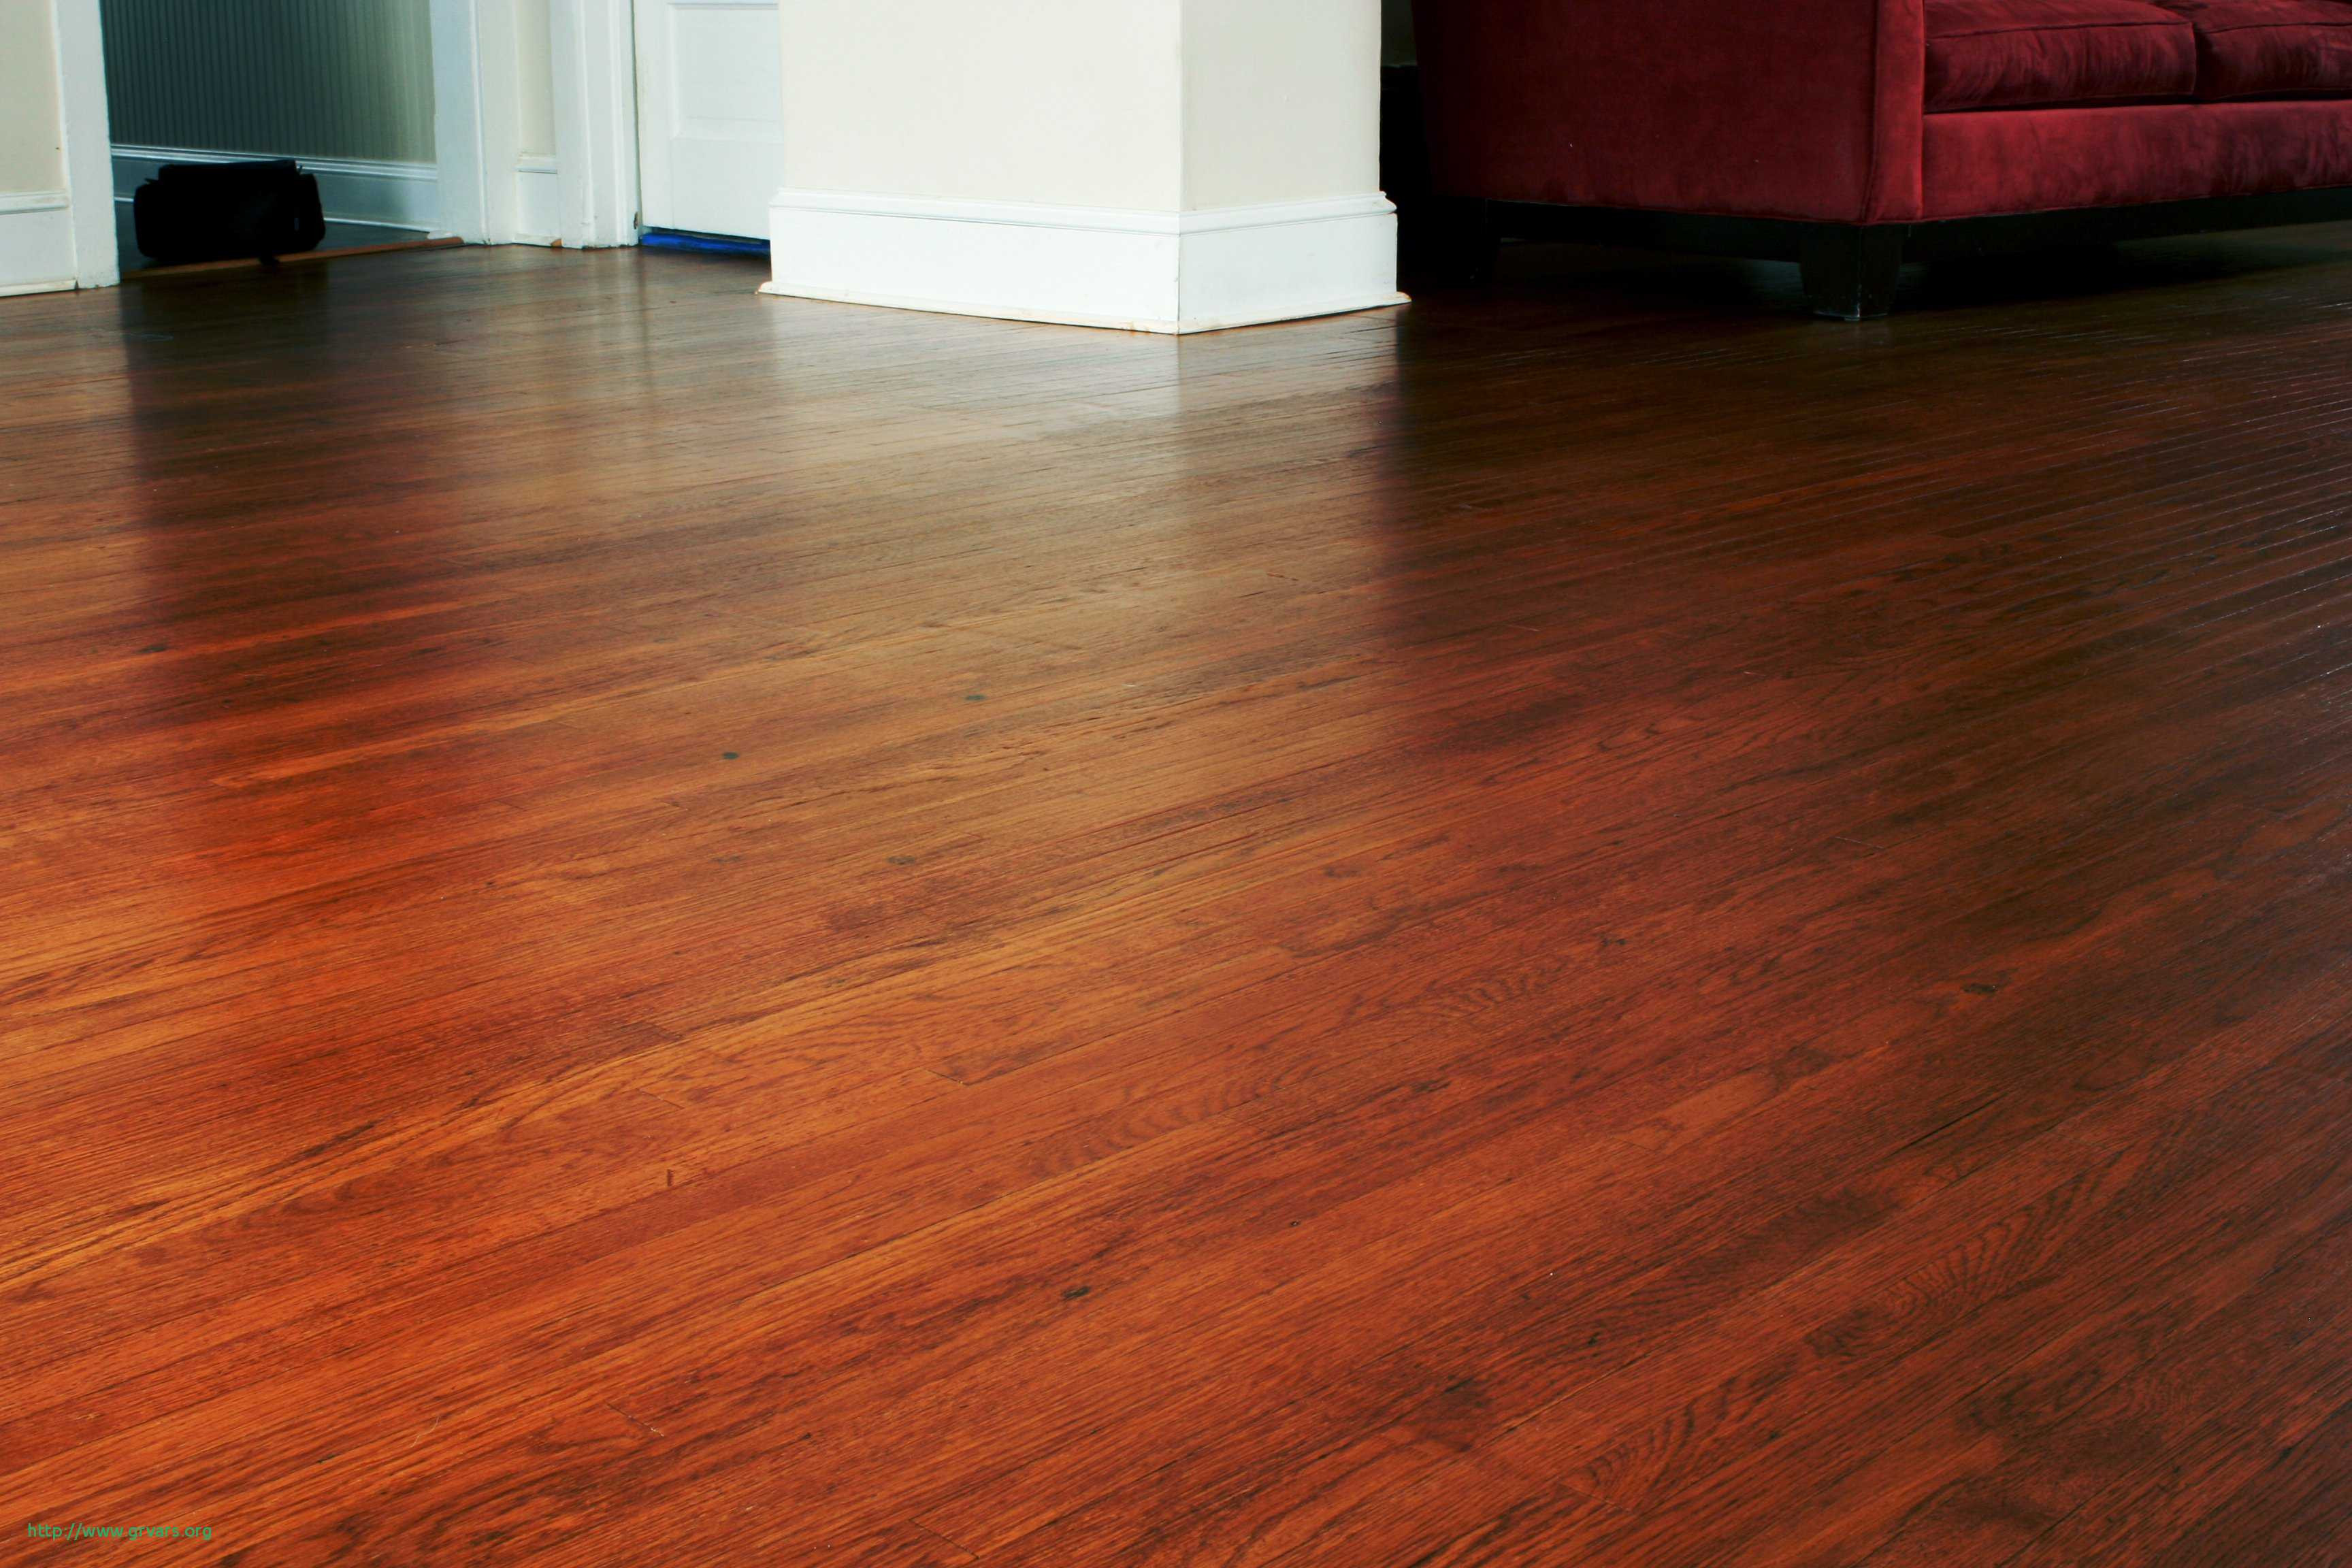 26 Fantastic How Much Does Home Depot Charge to Install Hardwood Floors 2023 free download how much does home depot charge to install hardwood floors of 17 frais cost to replace flooring in home ideas blog with regard to cost to replace flooring in home charmant how to diagnose an